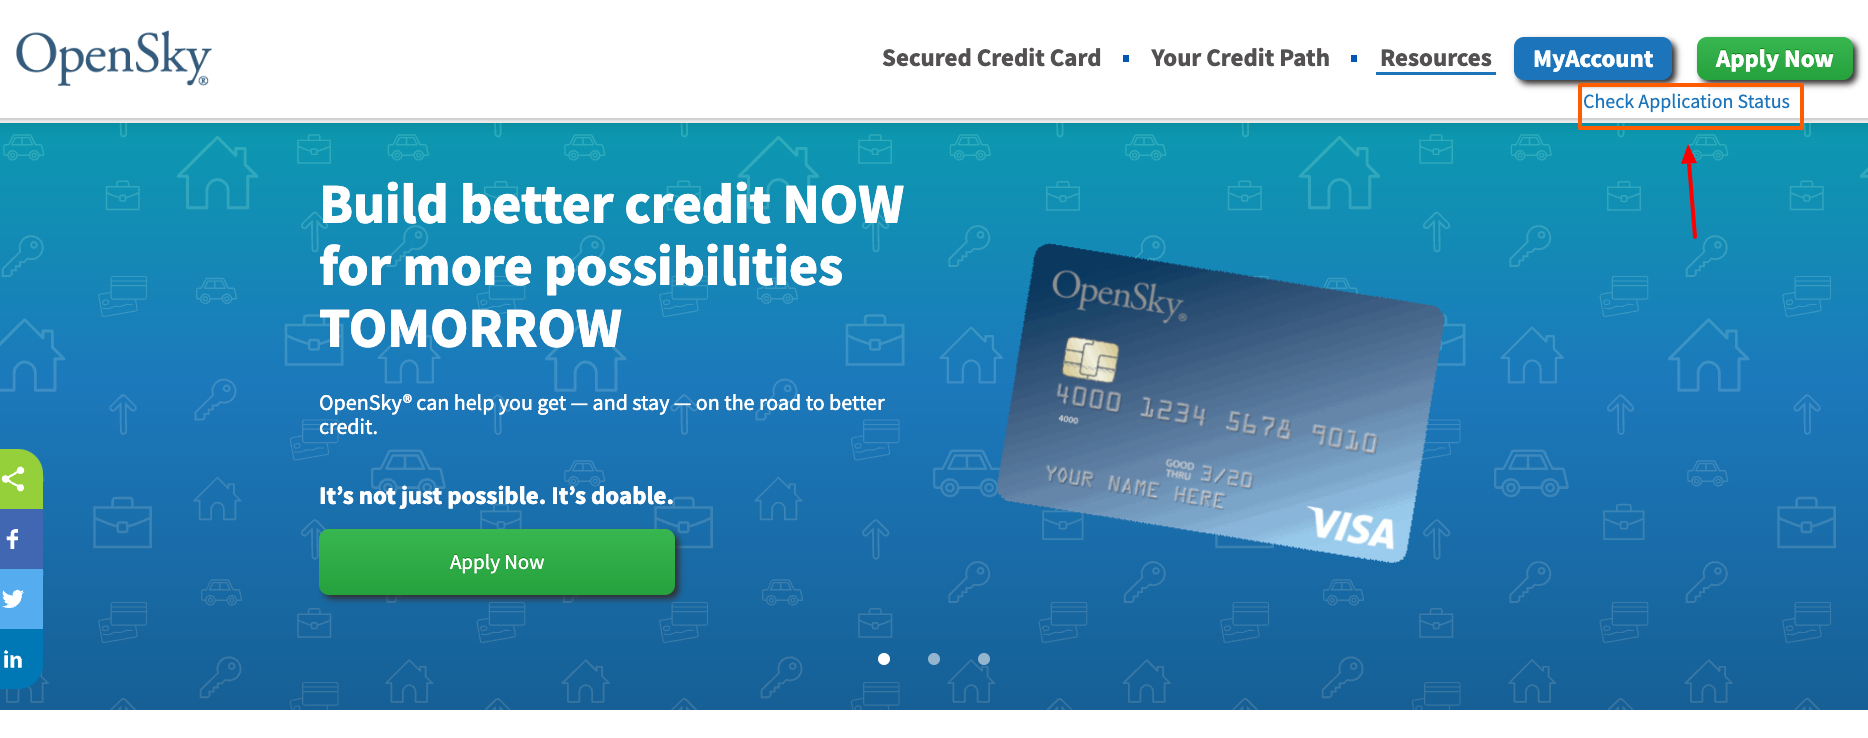 opensky credit card check application status